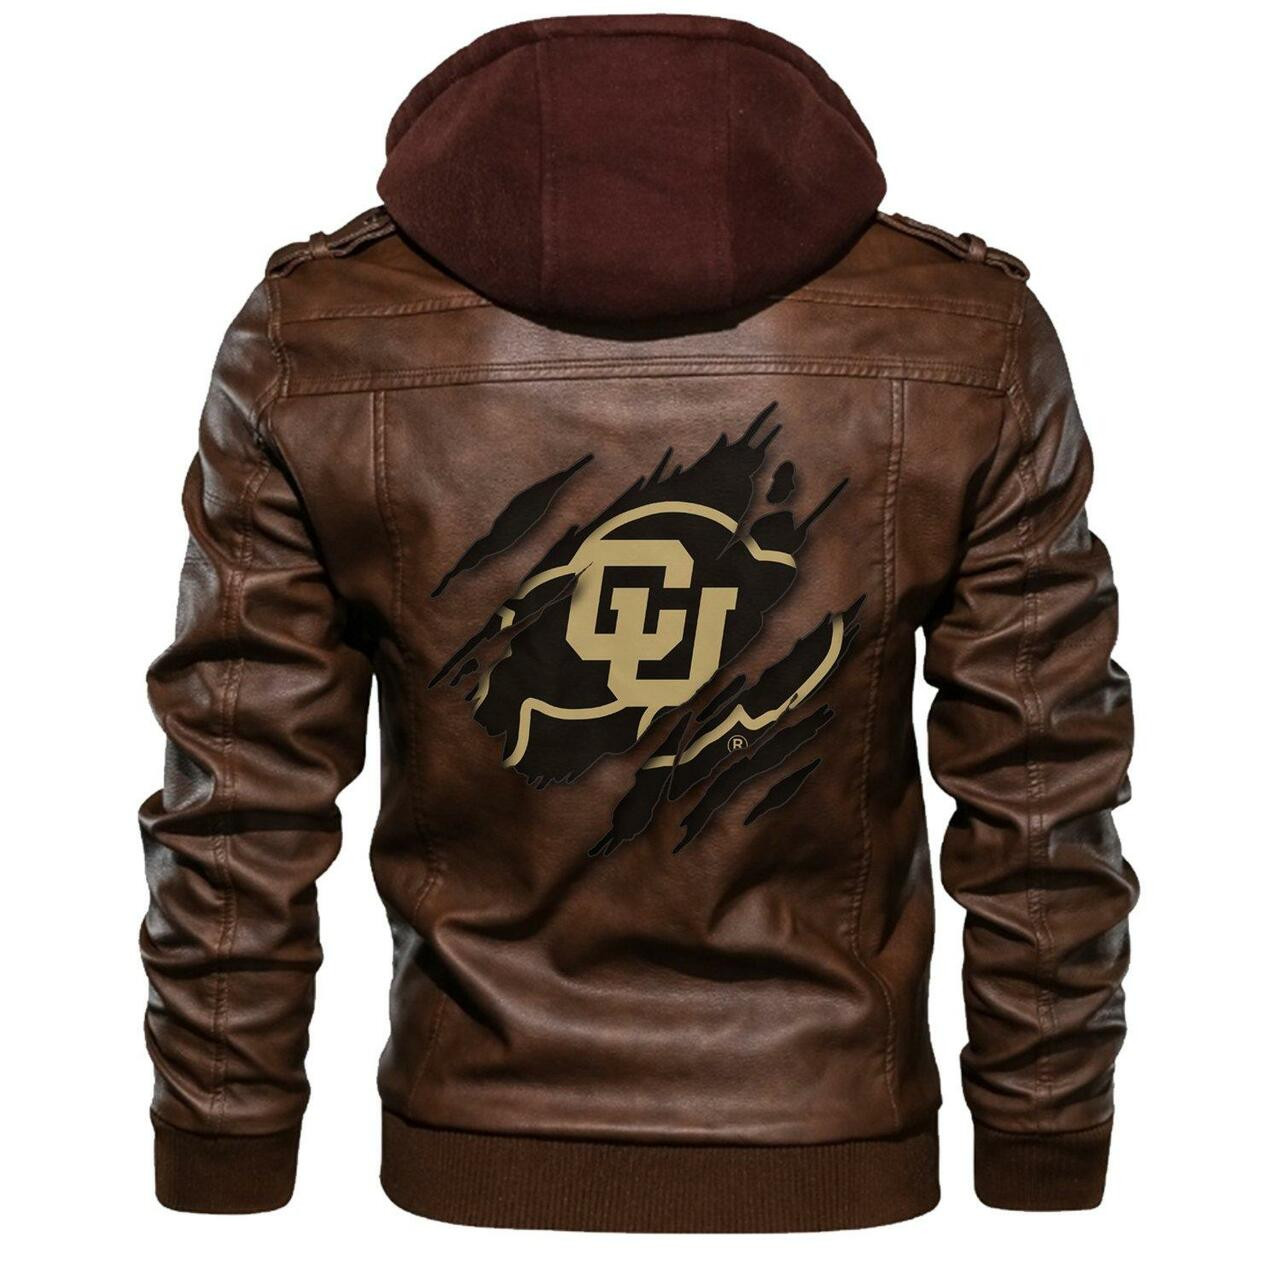 Nice leather jacket For you 148